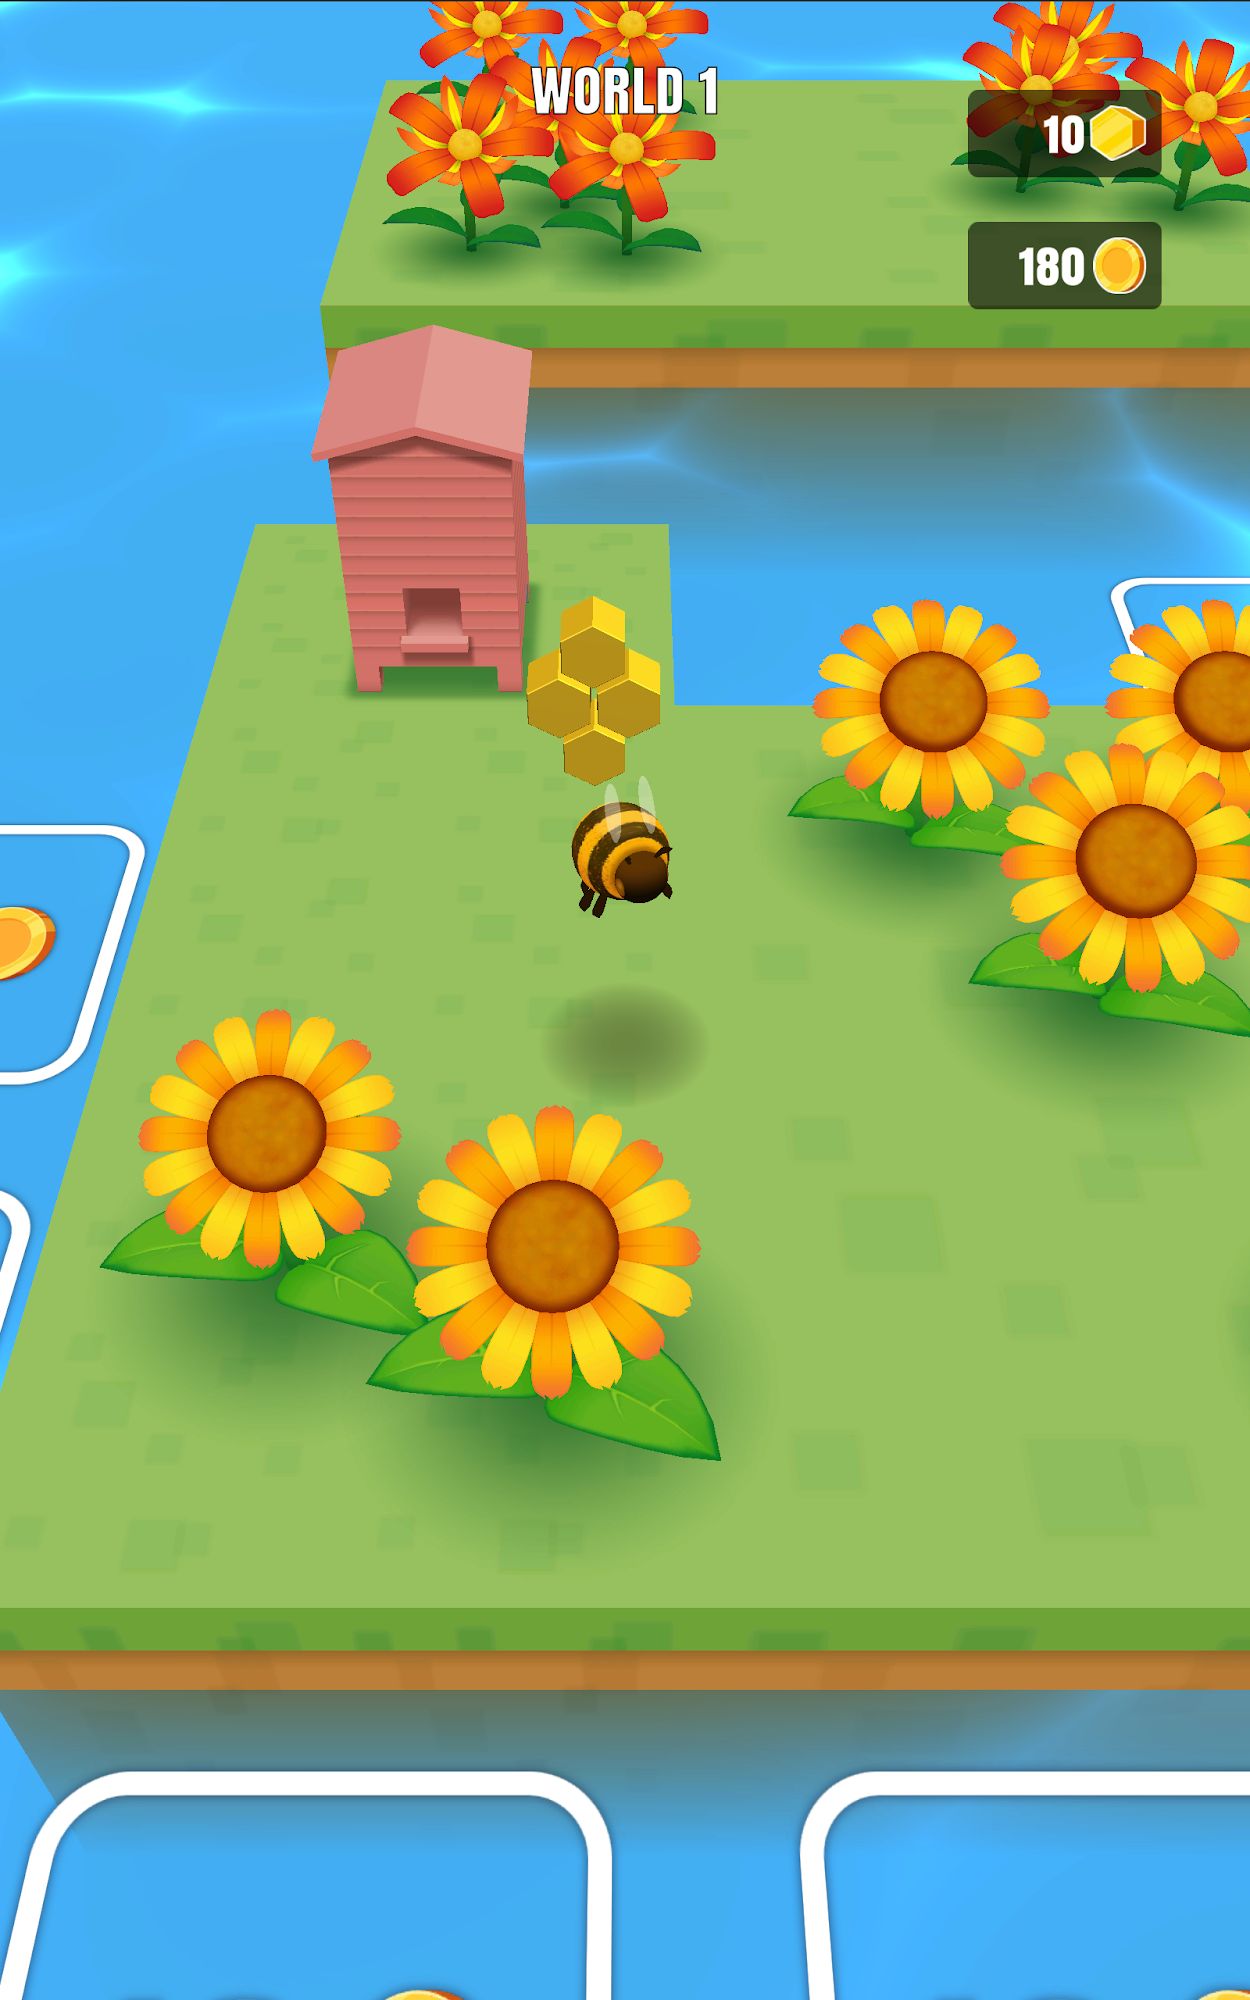 Download Bee Land - Relaxing Simulator für Android kostenlos.